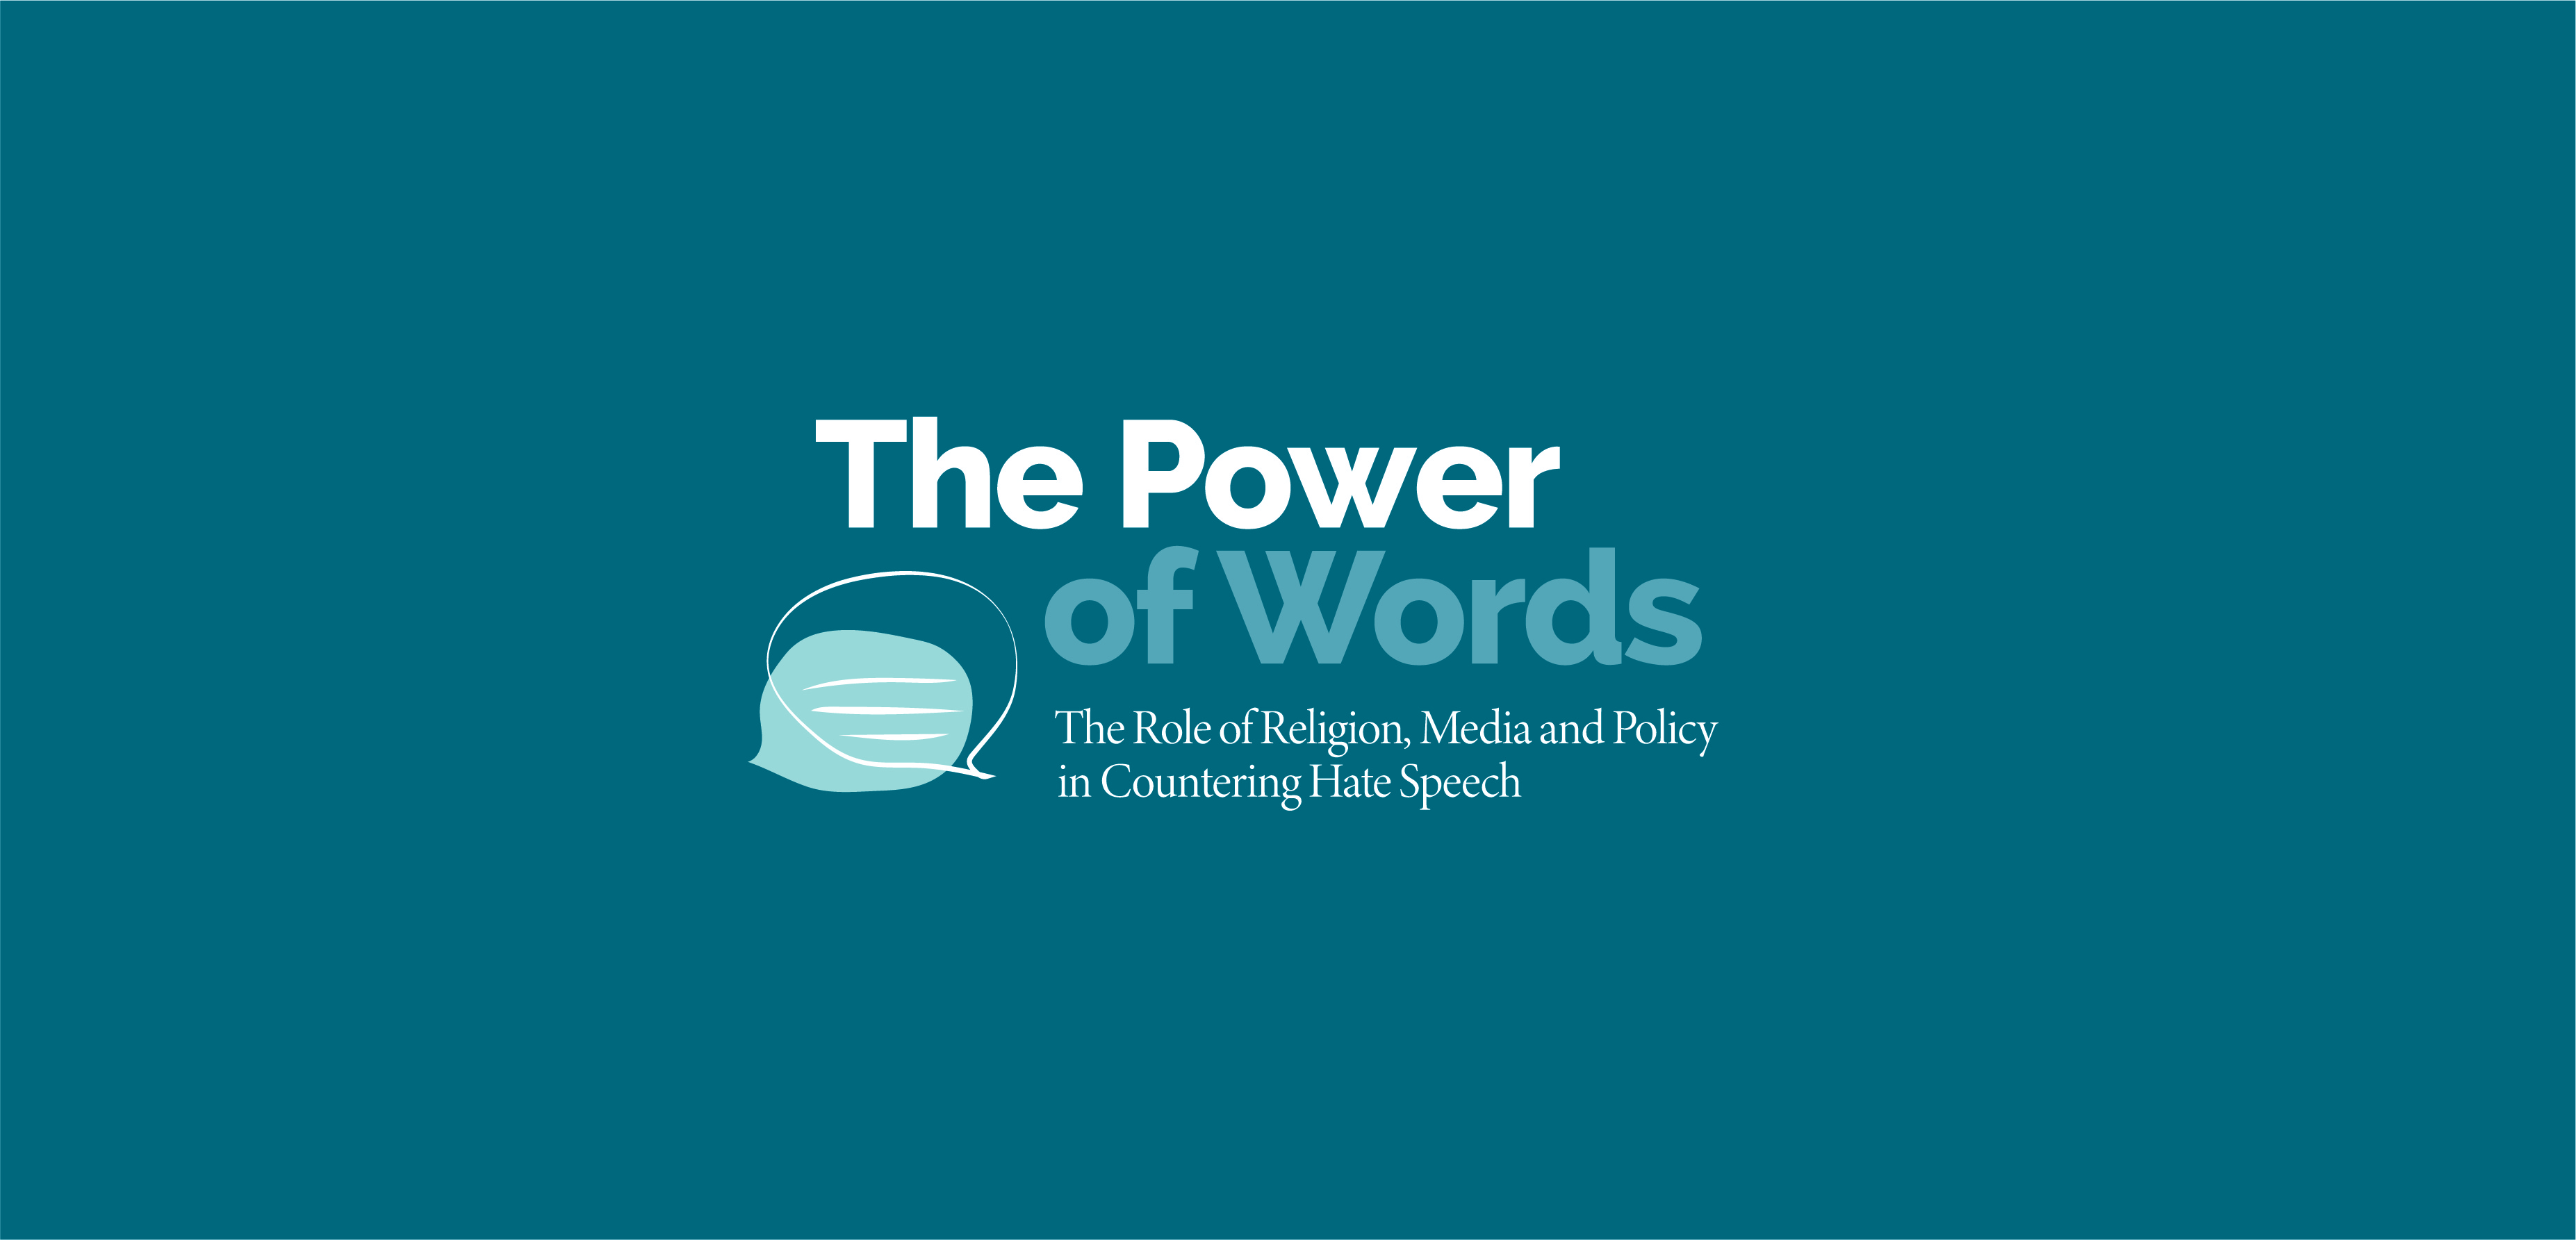 The Power of Words: The Role of Religion, Media and Policy in Countering Hate Speech